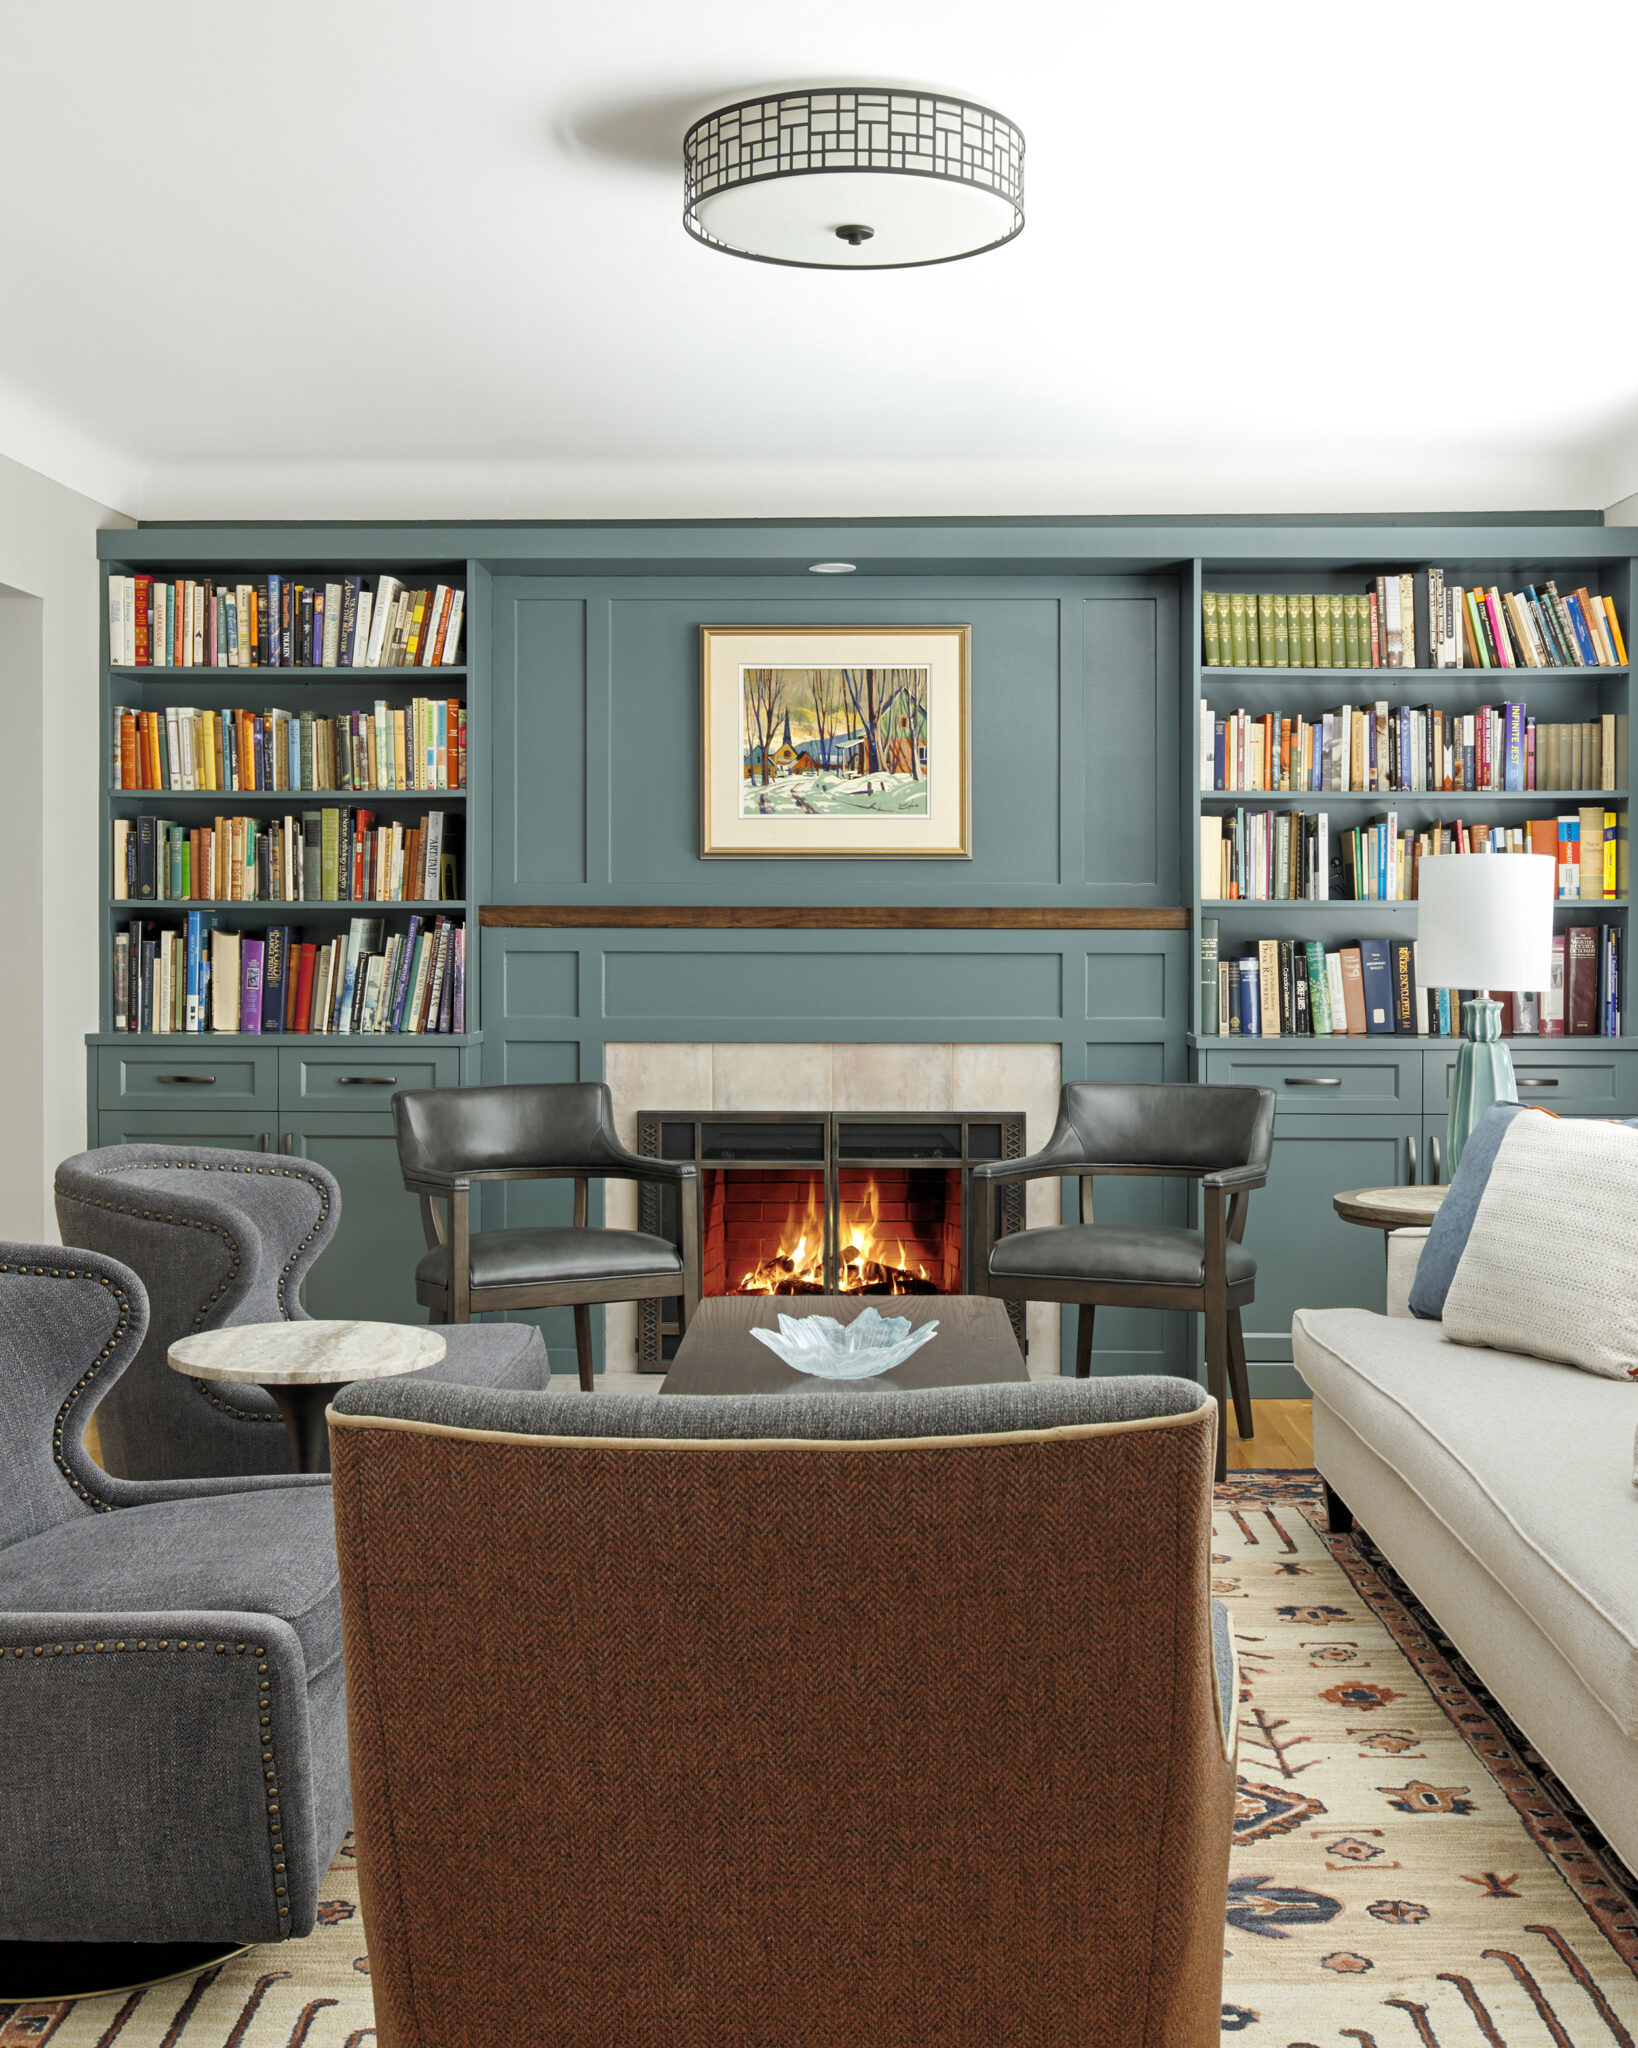 How to choose and highlight a focal point in a room